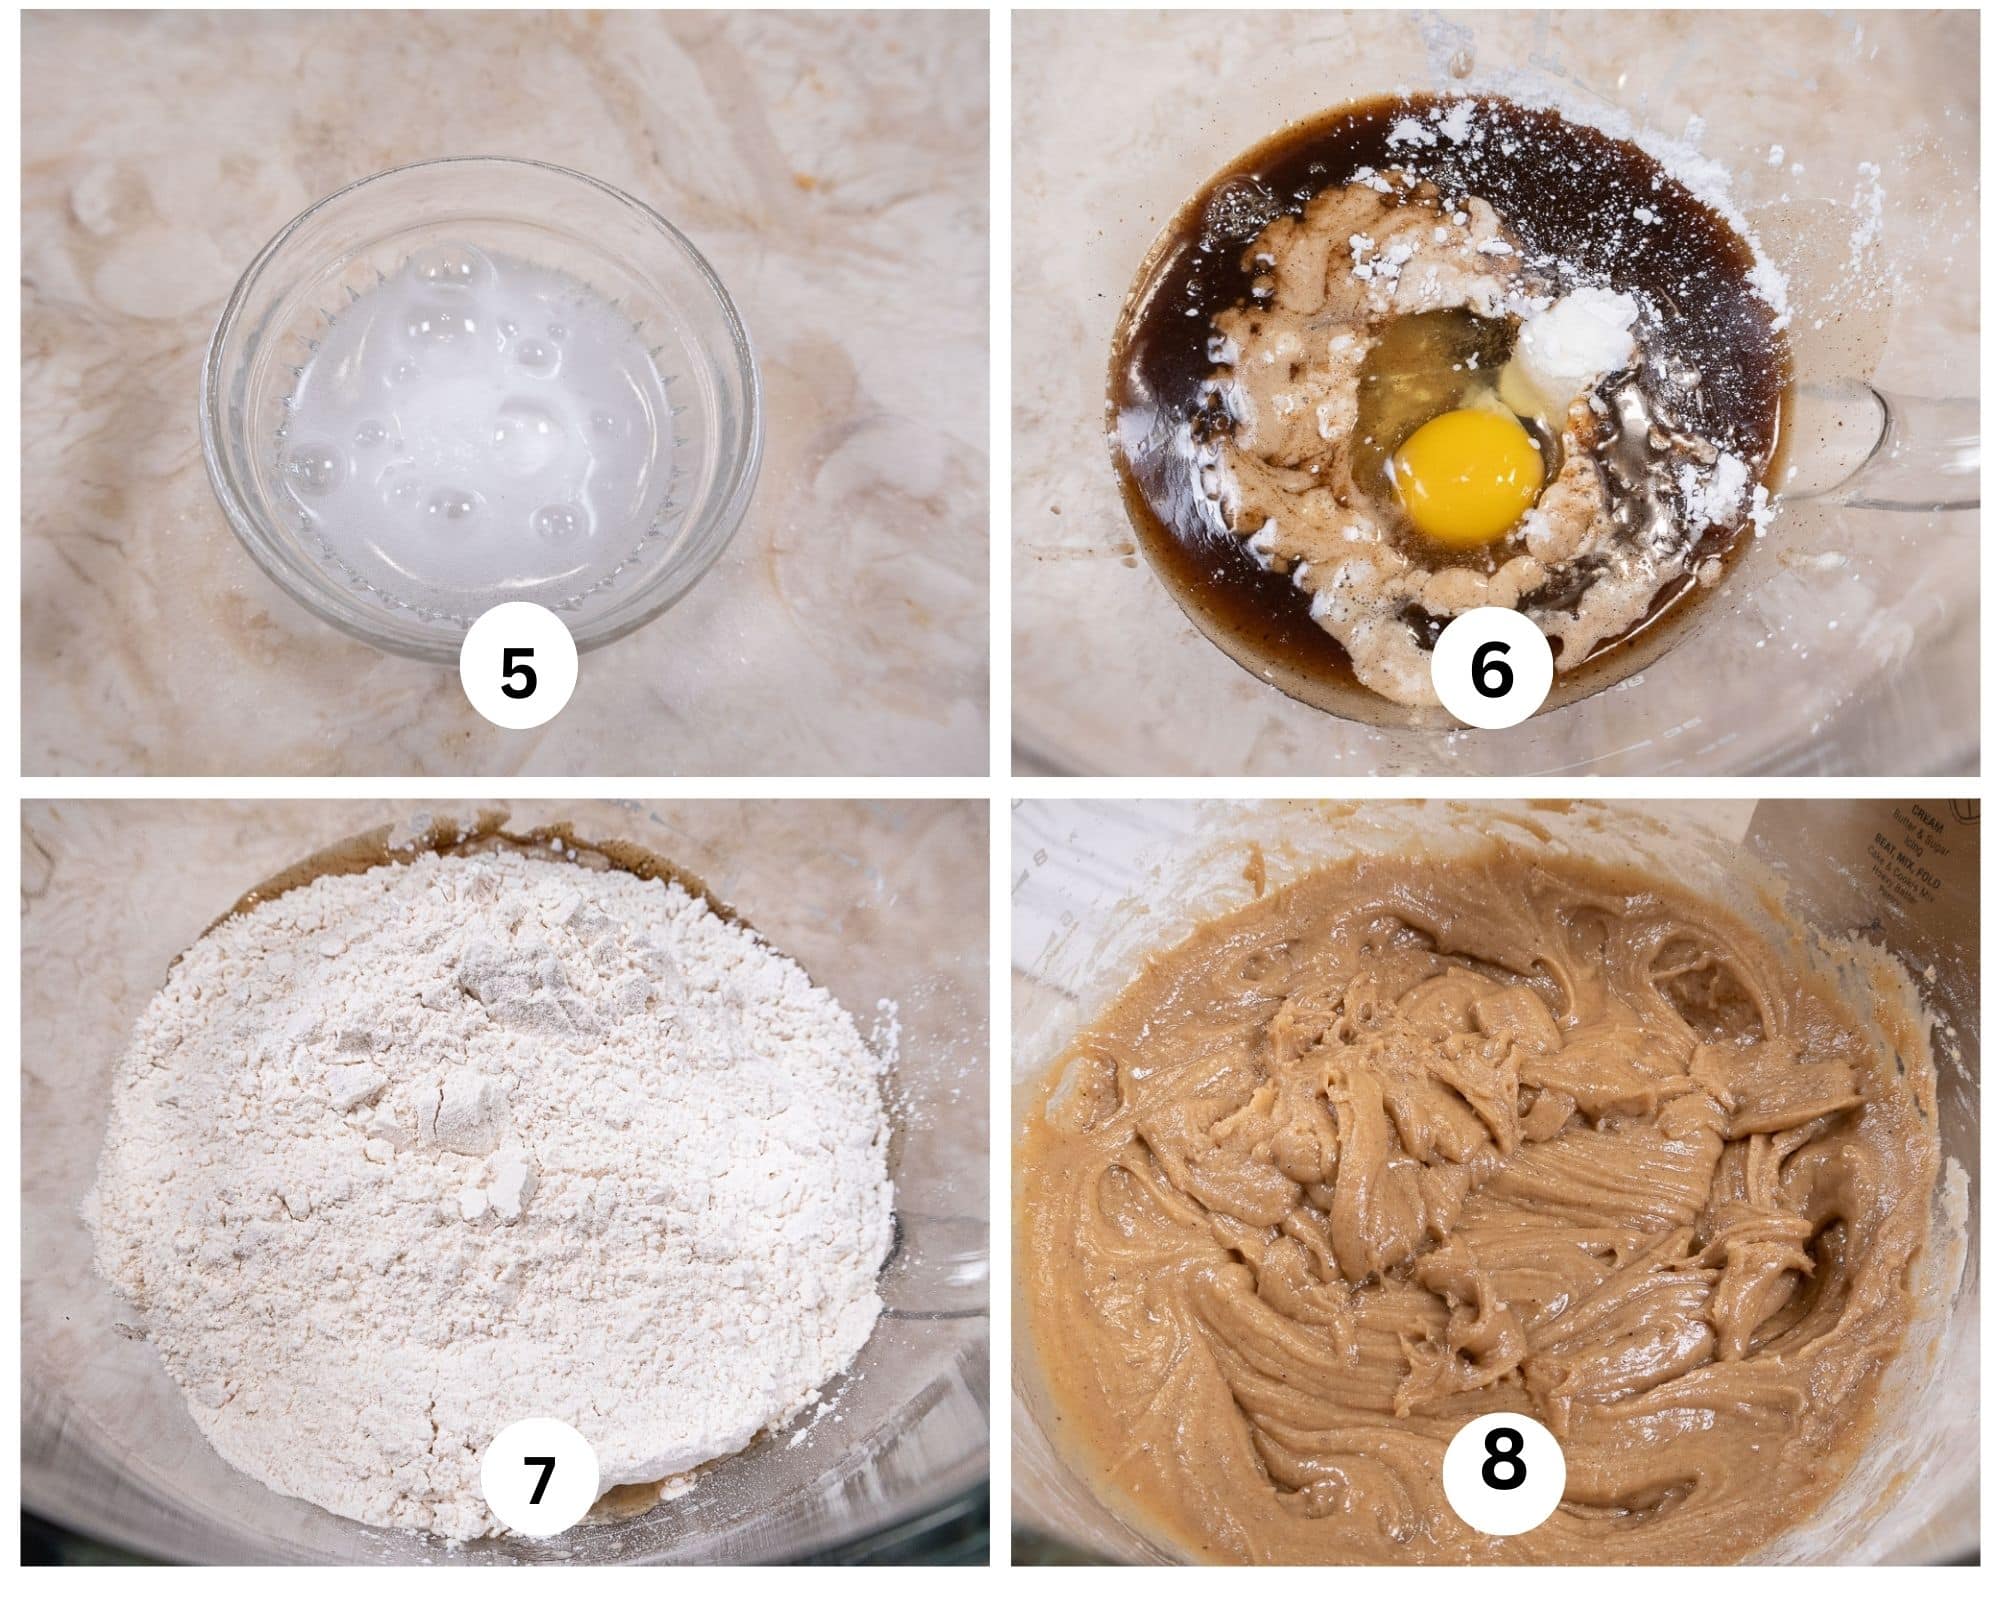 The second collage shows the baking soda bubbling in the vinegar, all of the liquid ingredients in the mixing bowl, the flour added and the batter completely mixed.